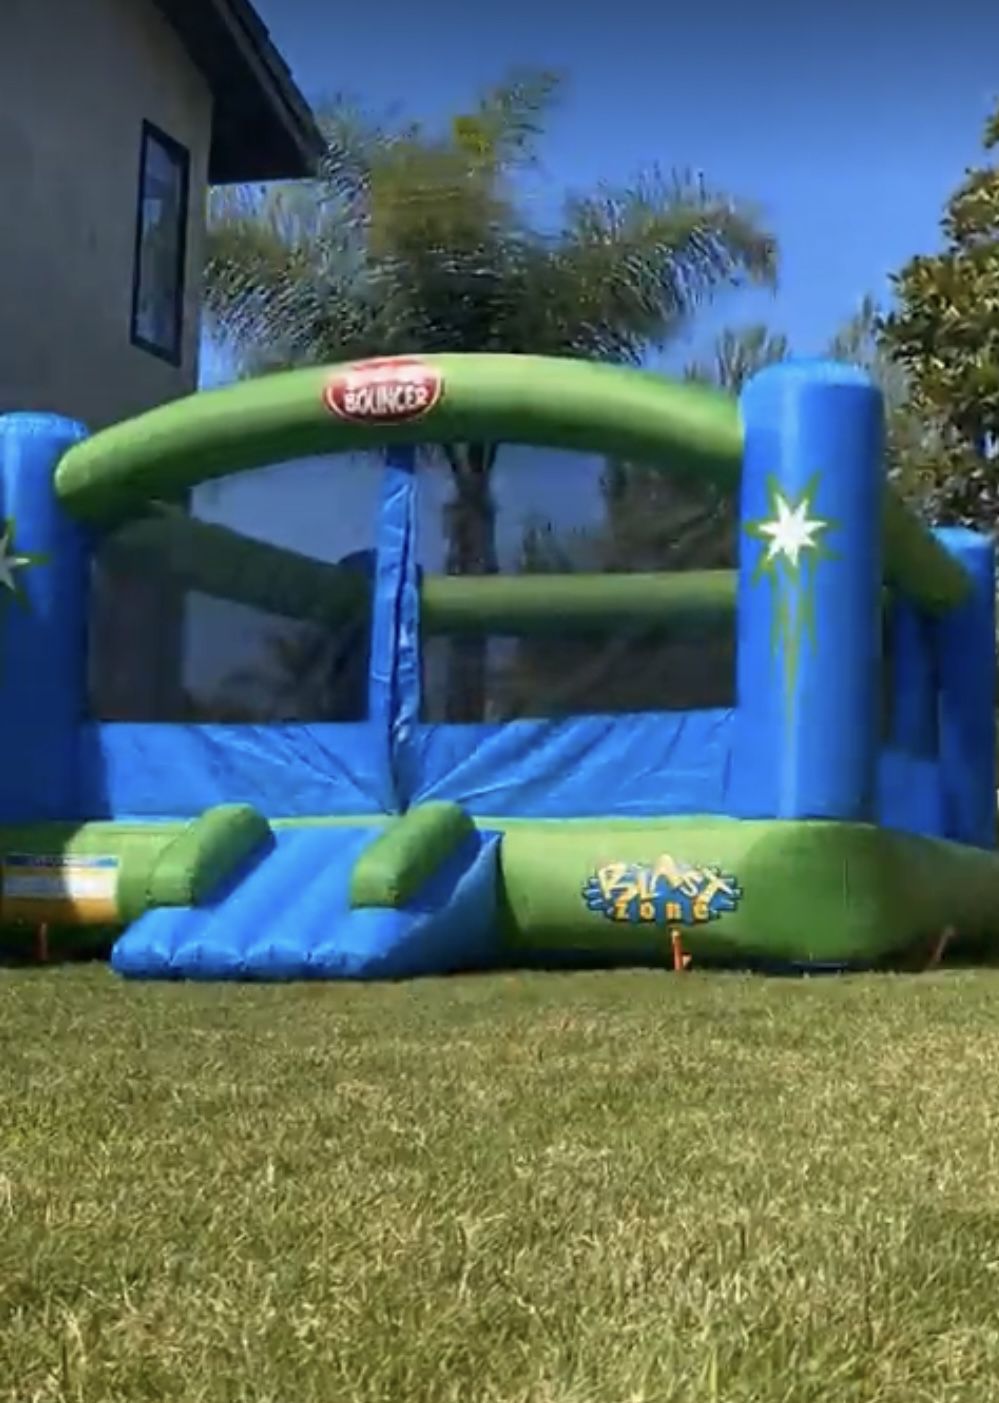 Large Commercial Grade Bouncer Jump House for SALE NOT RENT in La Jolla. Birthday Favorite.  